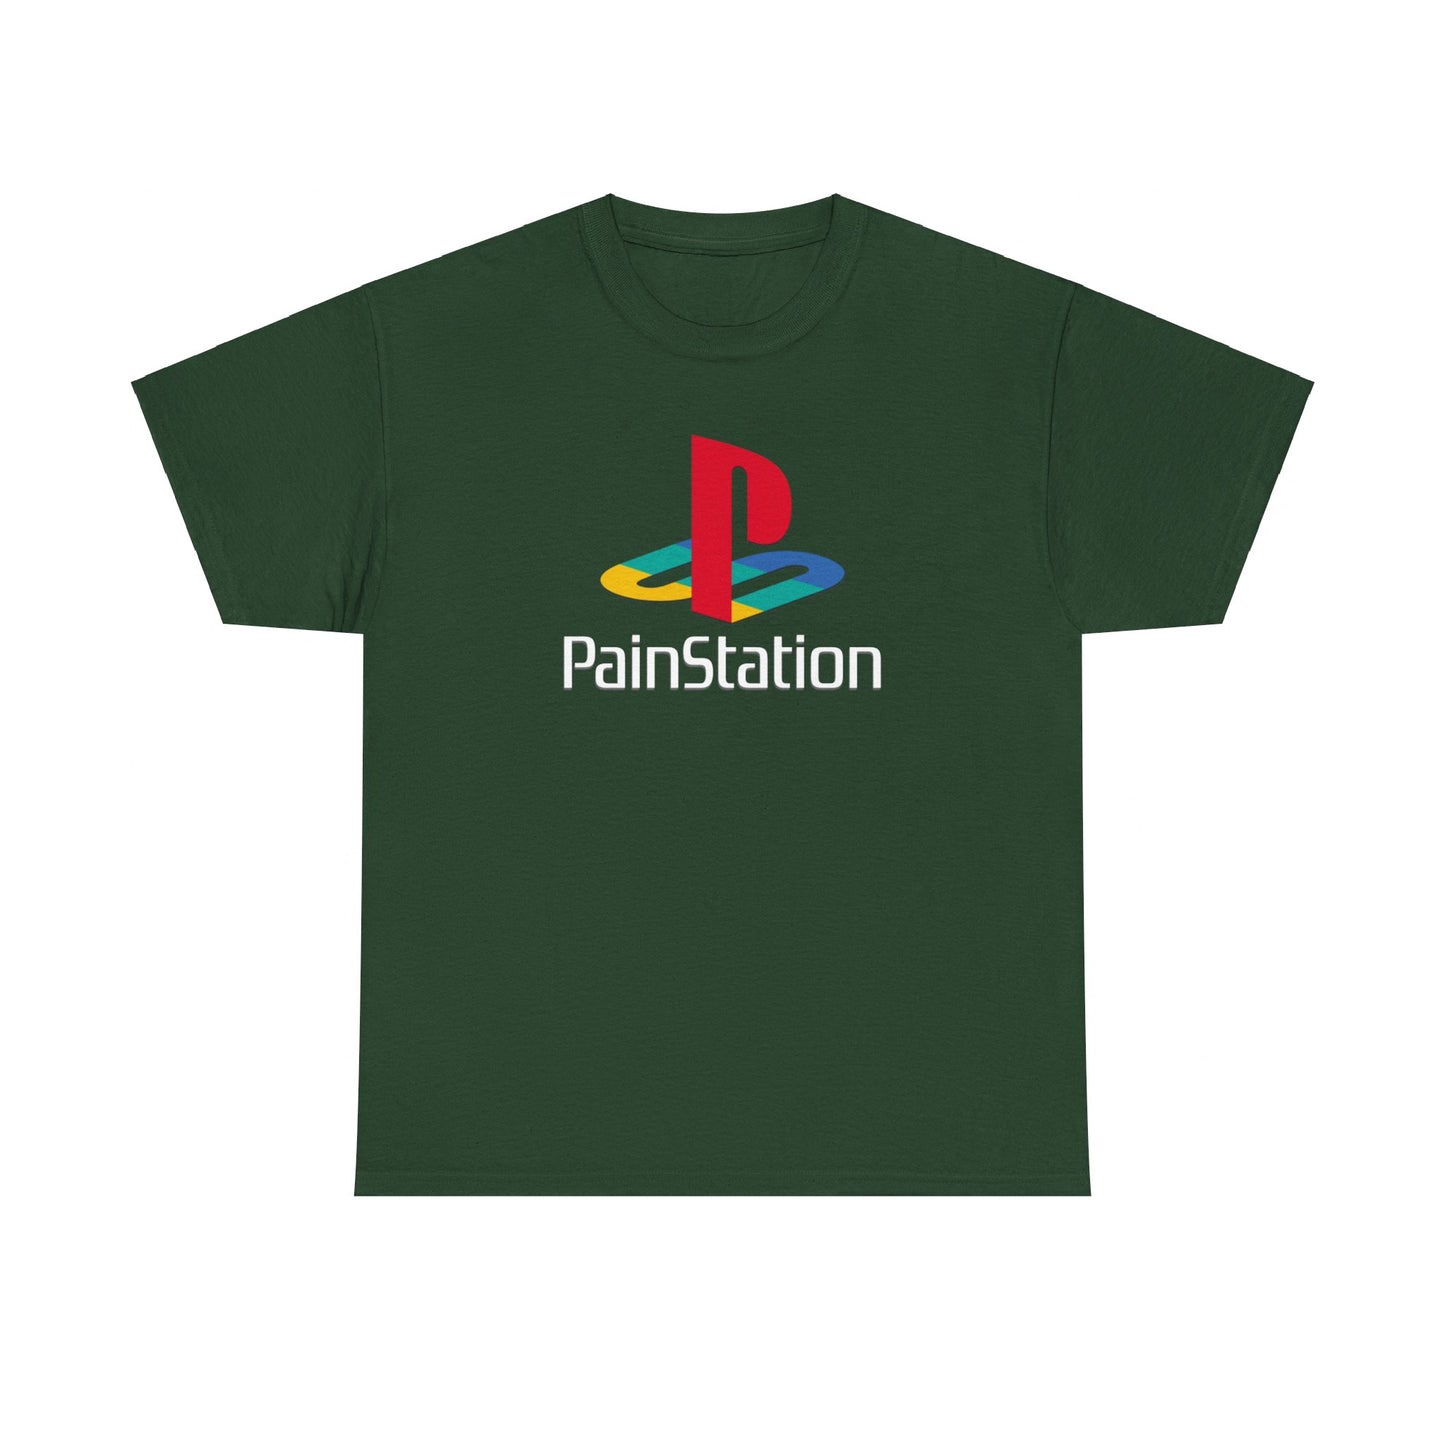 Playstation gaming Shirt ideal for everybody that loves gaming, perfect gift for teenagers or friends that have a Playstation, Playstation Logo sample remix T-Shirt, Playstation Logo Shirt, Funny Meme Clothing, Gamer Clothing, Cool Shirt, Paistation Playstation sample Shirt, Funny statement T-Shirt